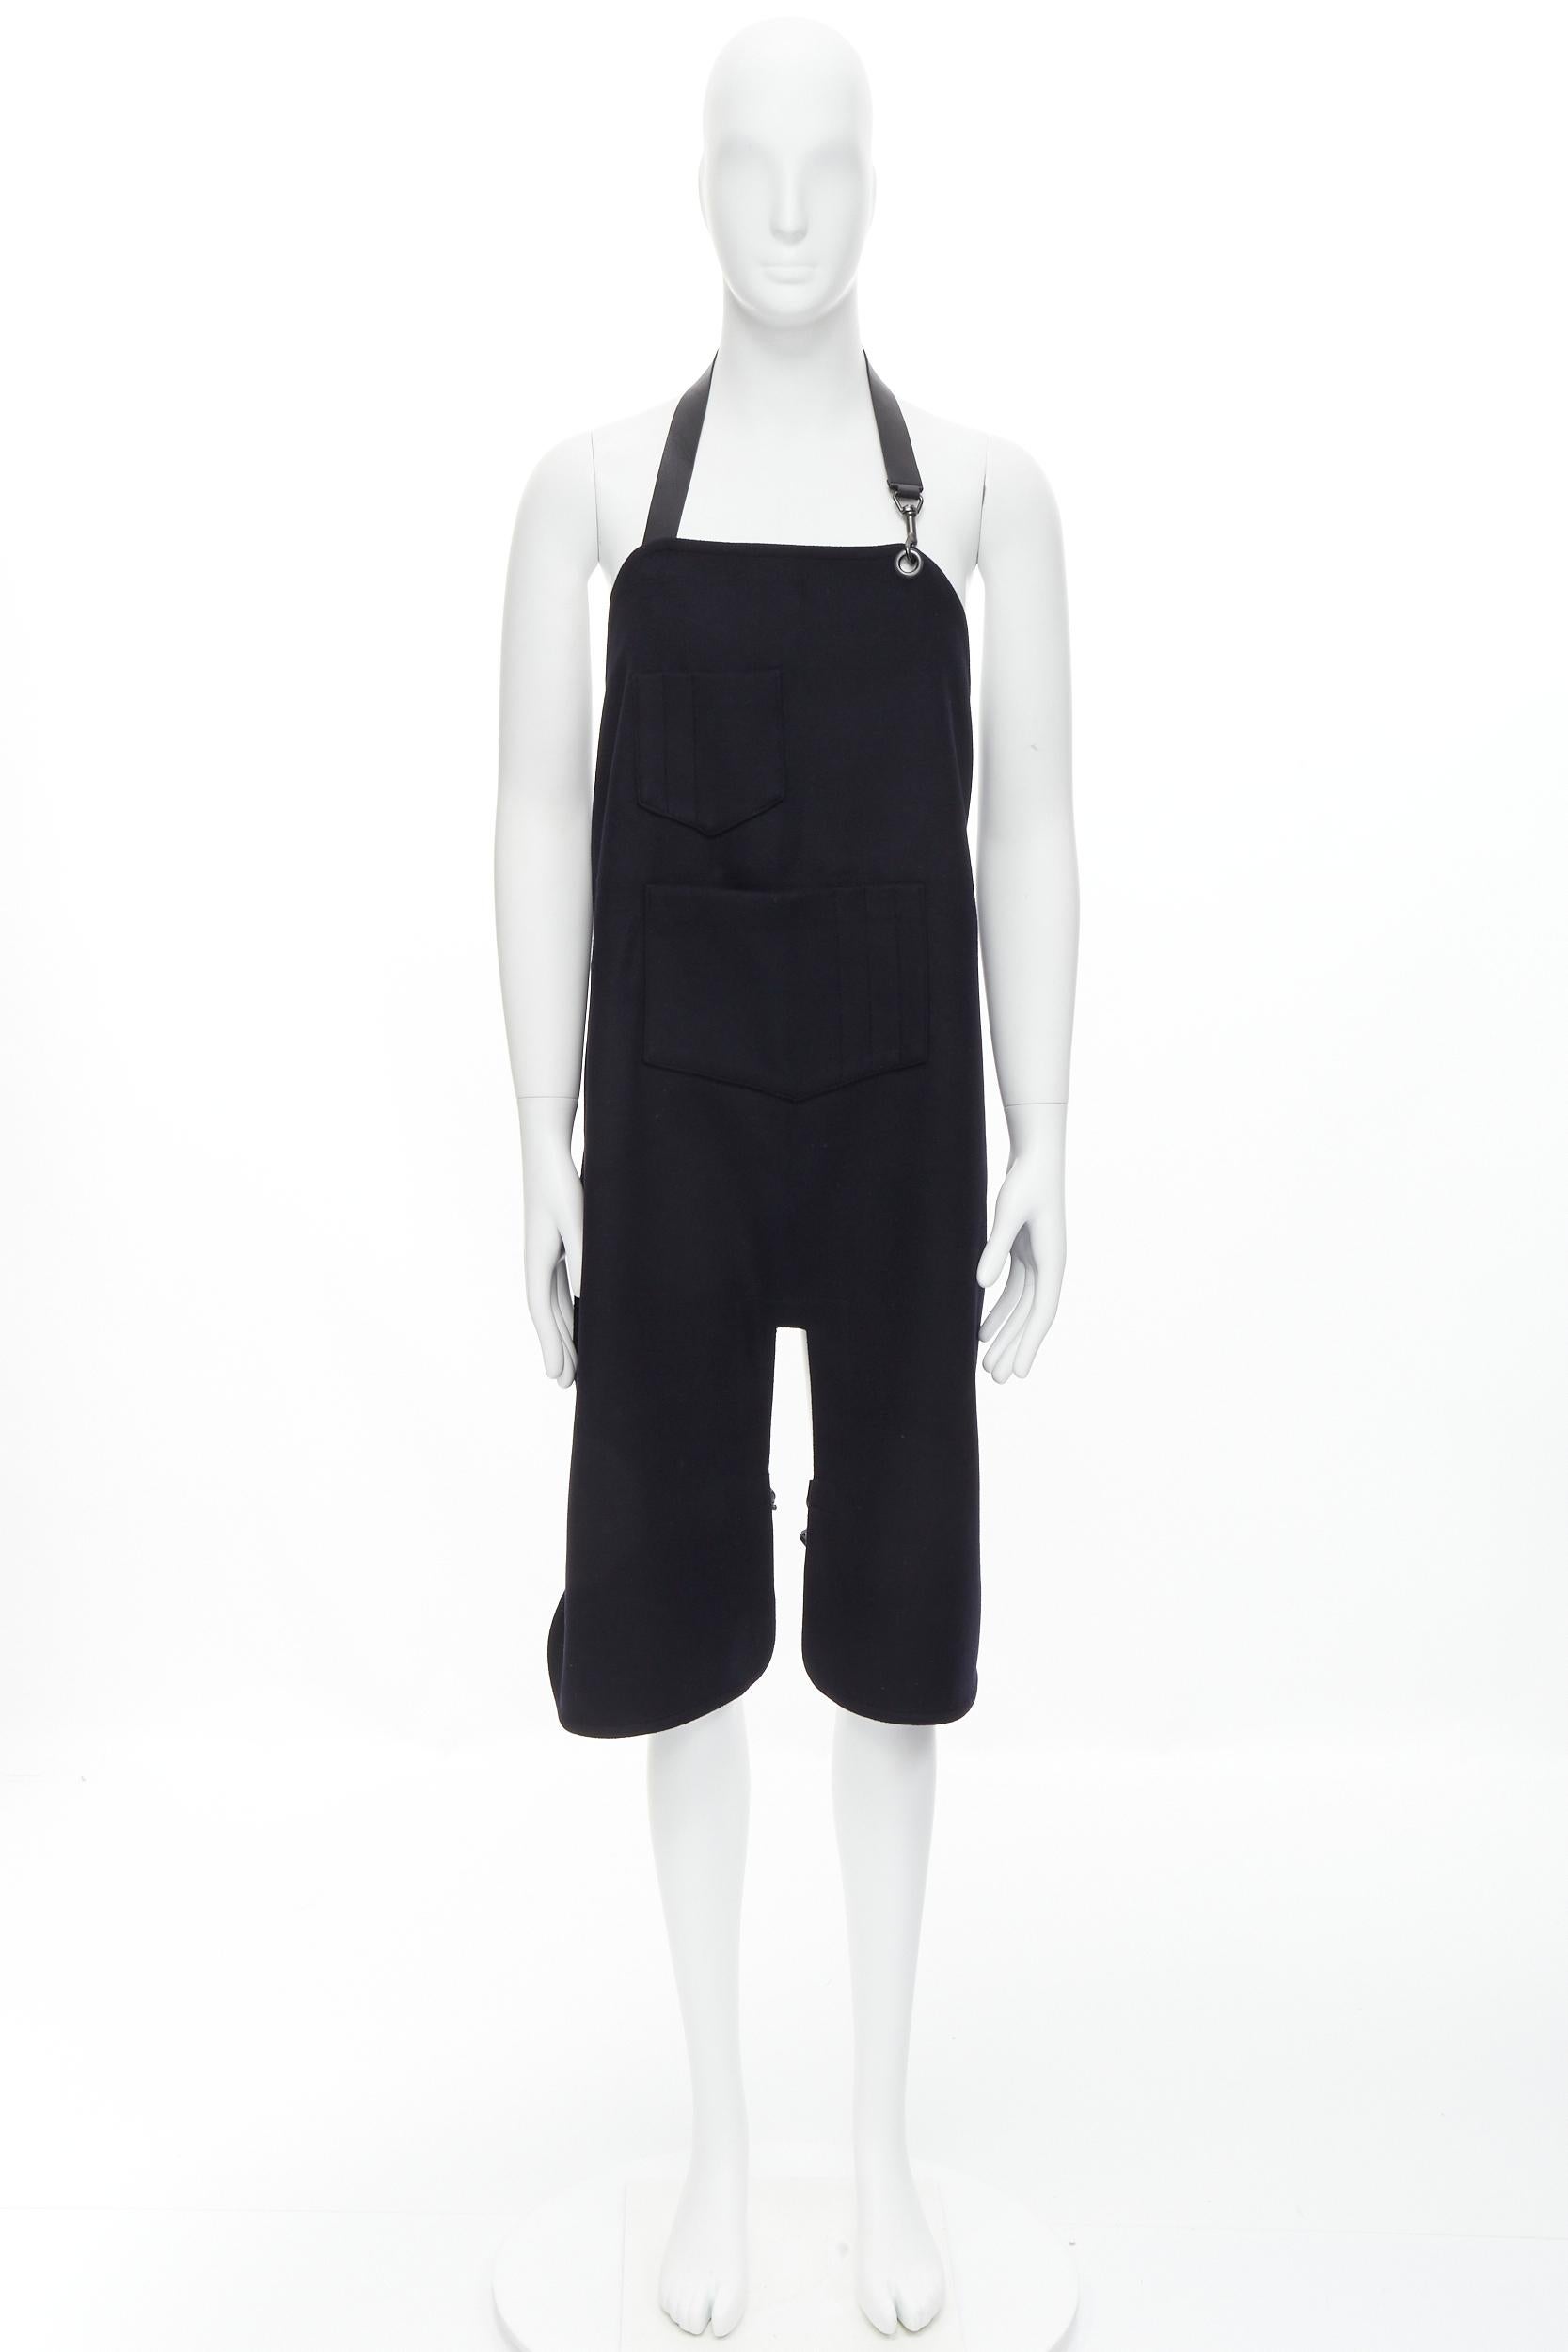 BALENCIAGA Runway black wool leather strap buckle apron dungaree For Sale 4